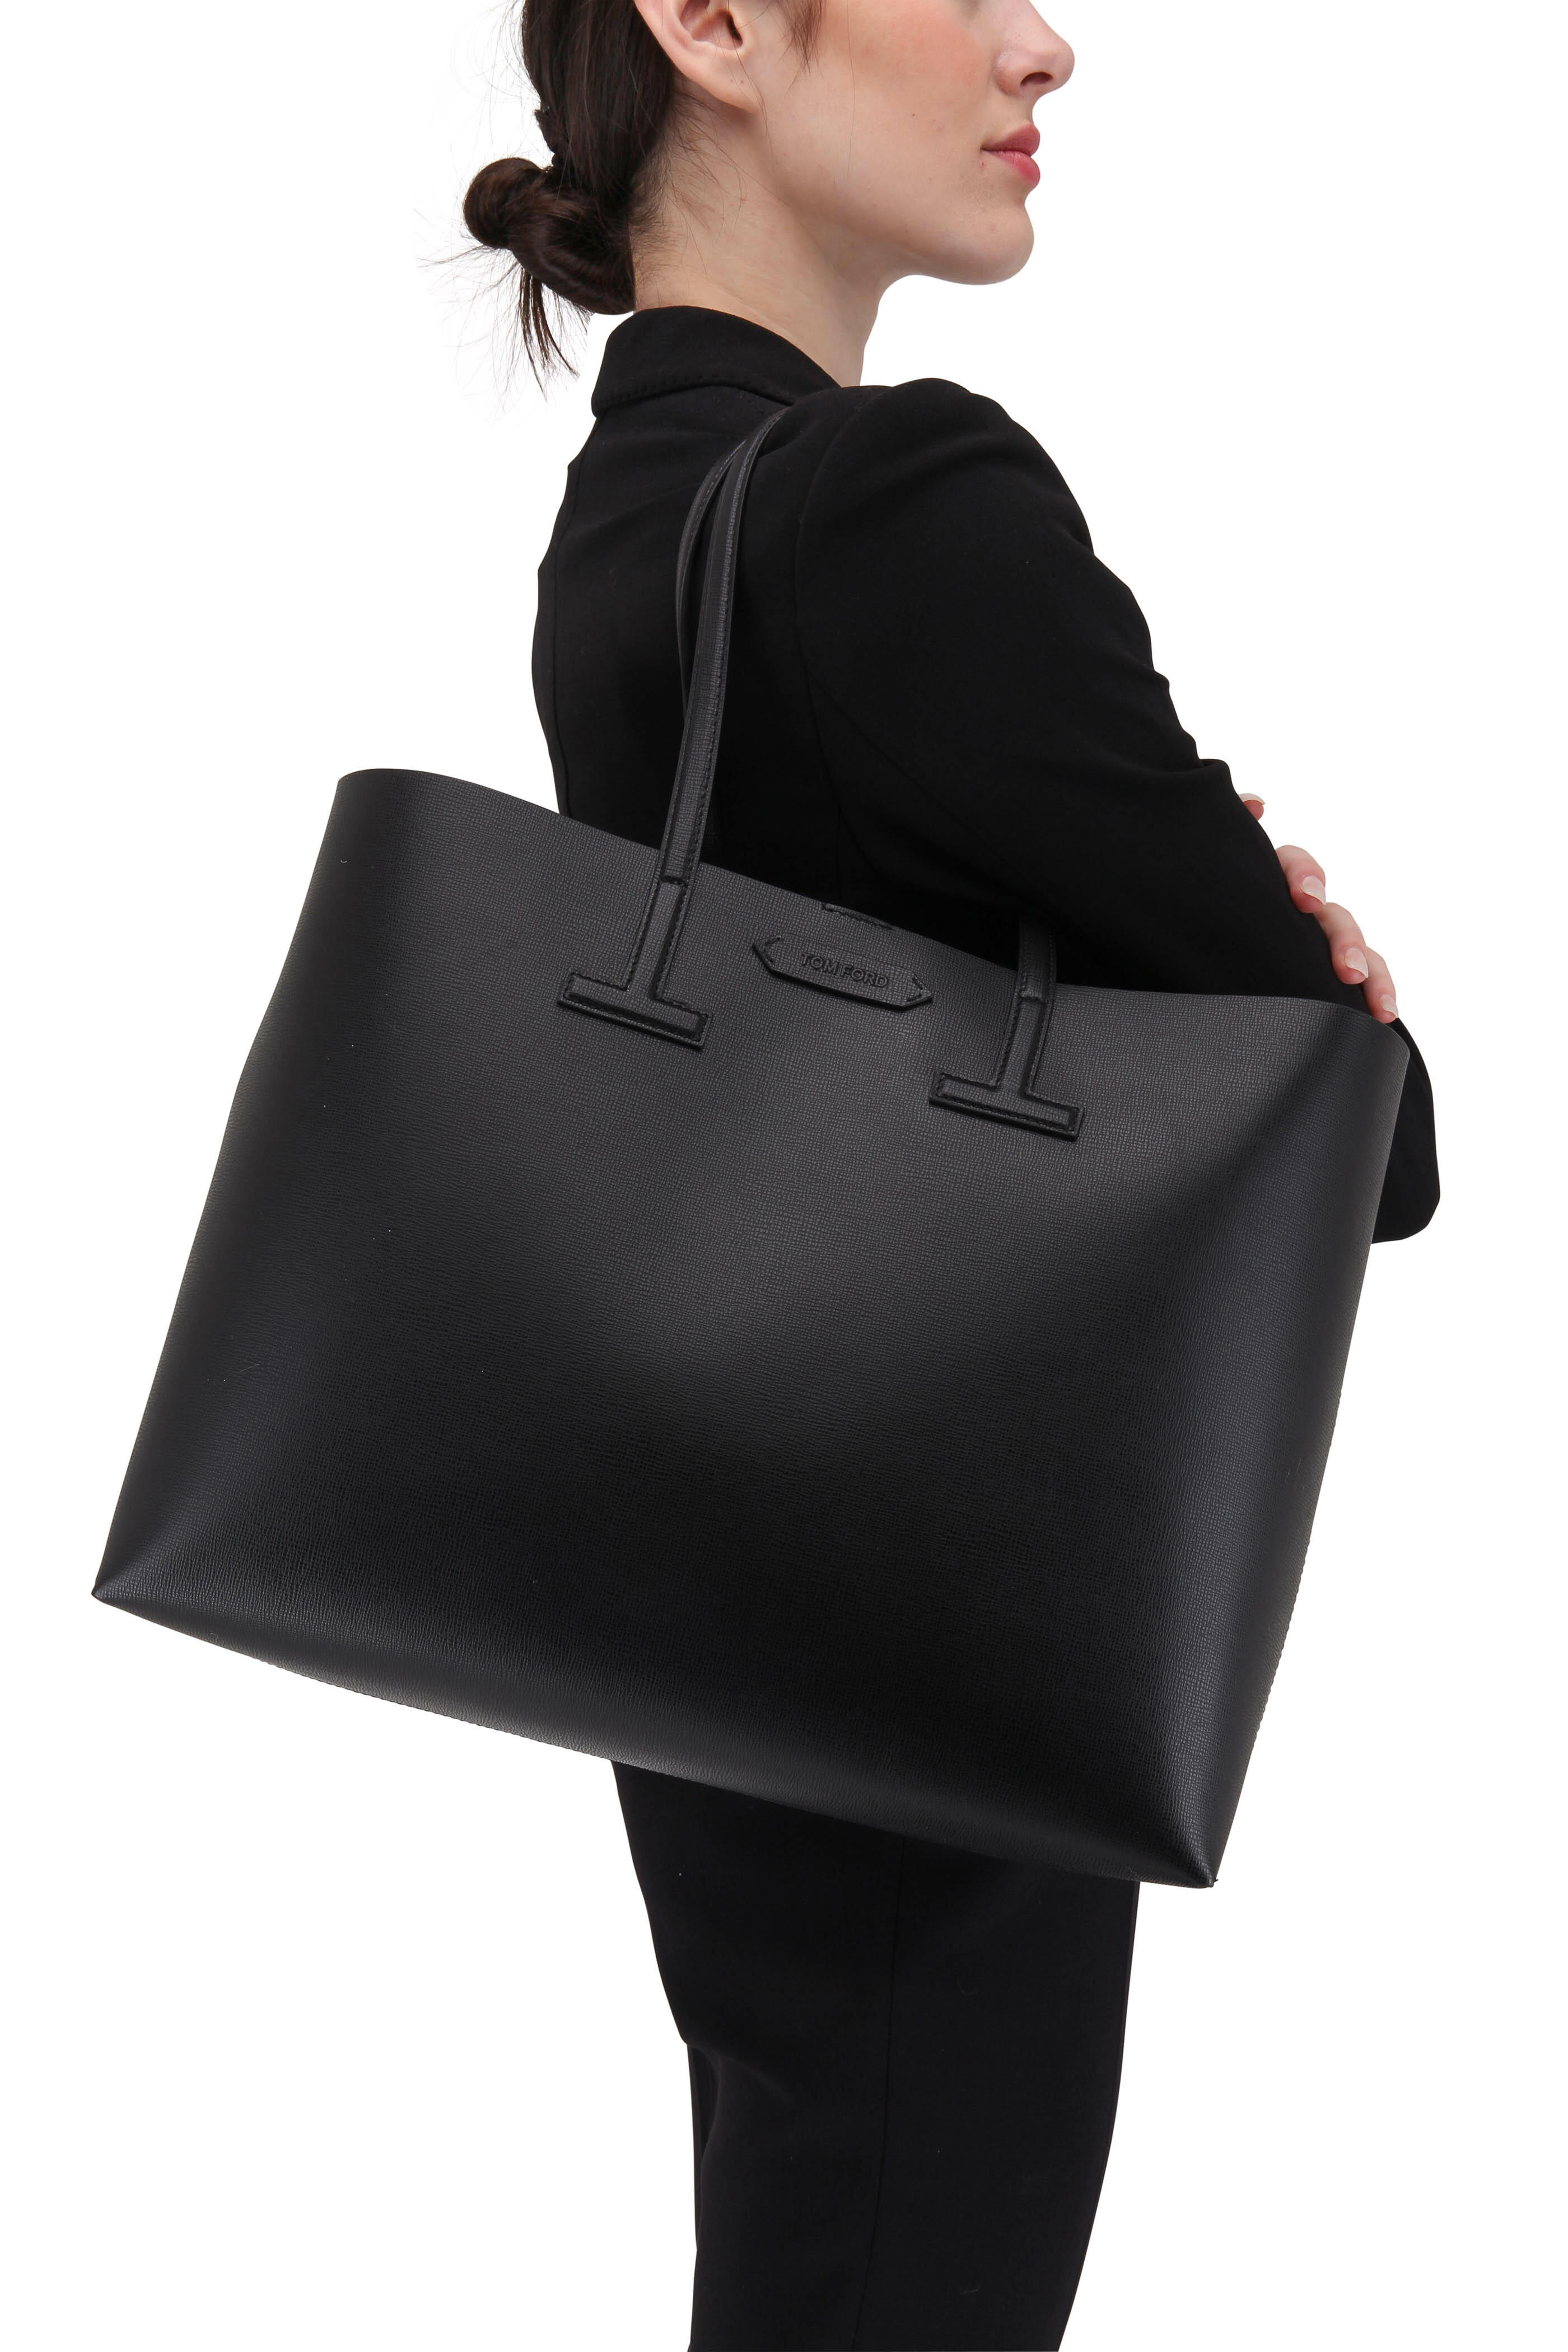 Tom Ford - Black Saffiano Leather Medium T Tote | Mitchell Stores